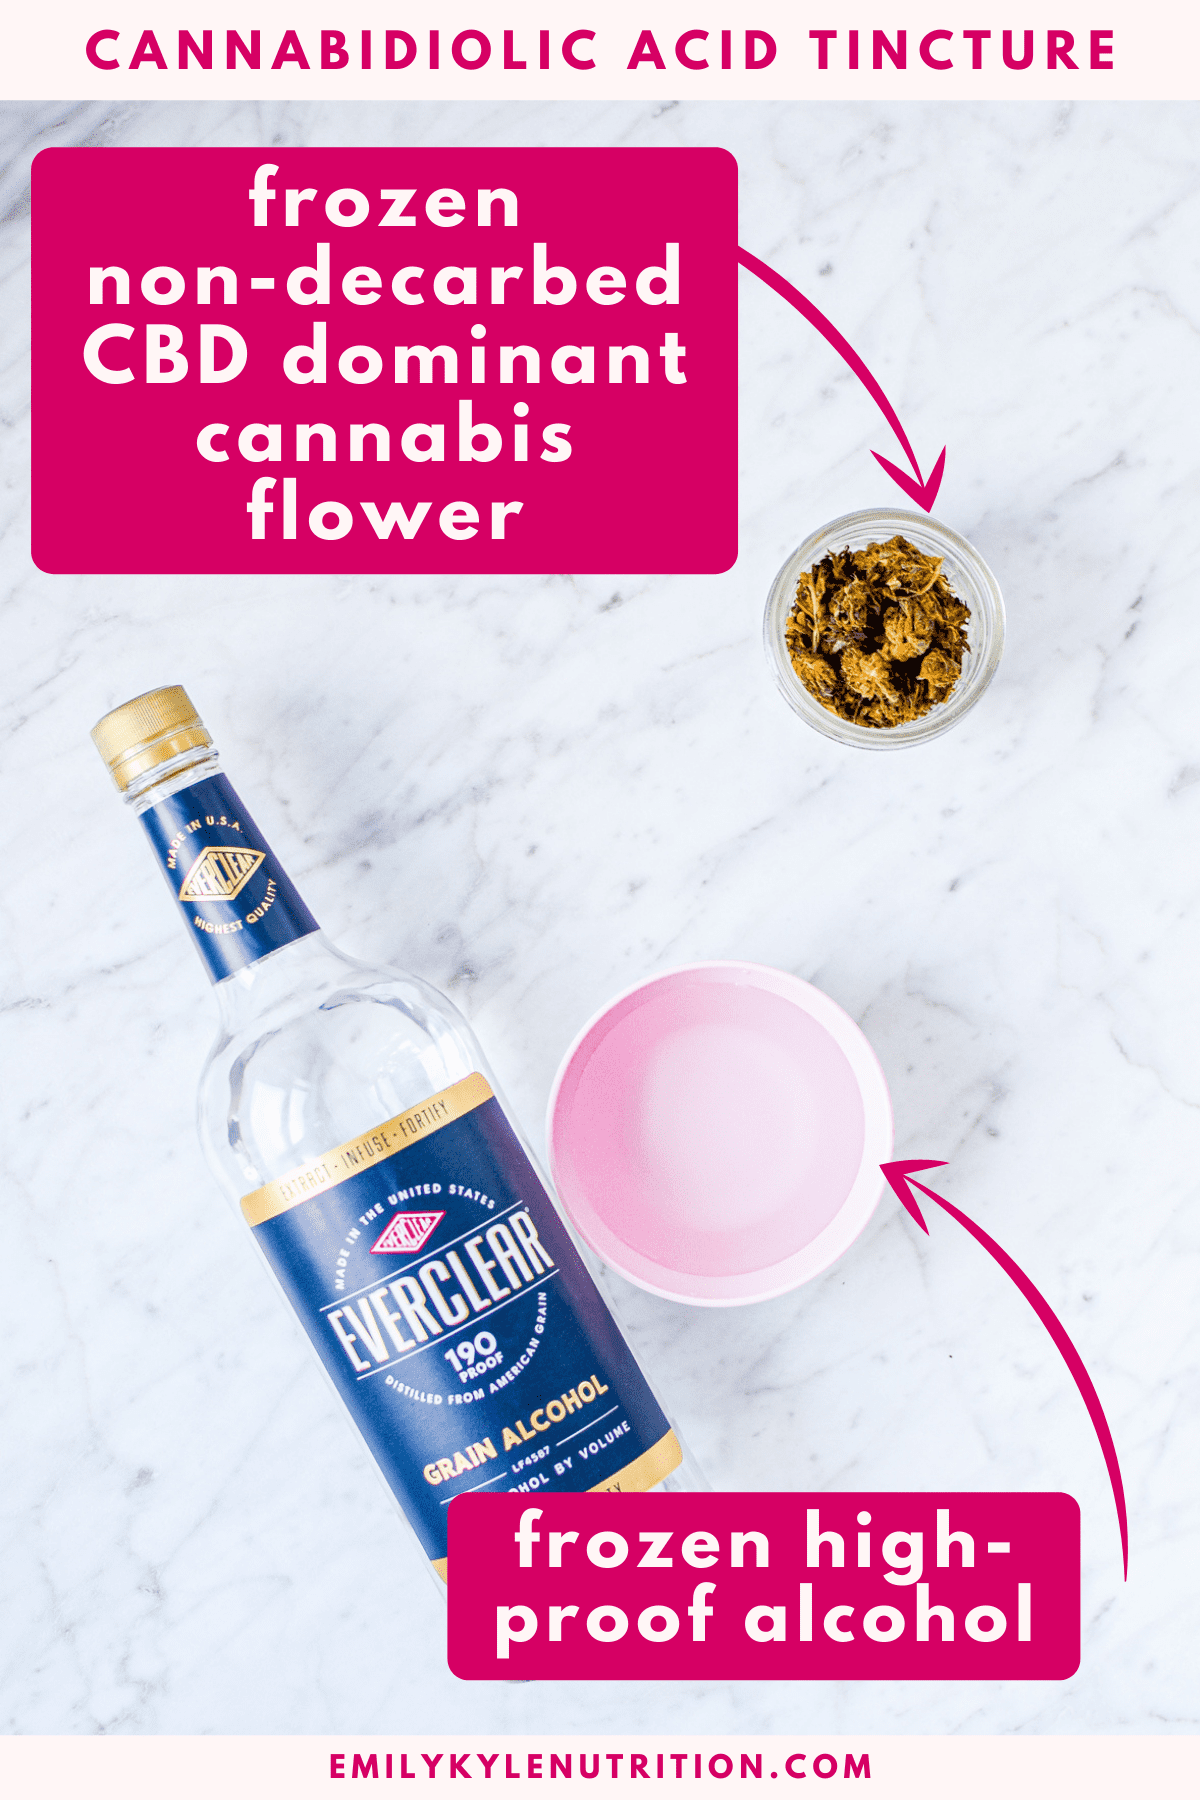 A white countertop with a mason jar full of decarbed cannabis flower and a pink cup full of high-proof alcohol